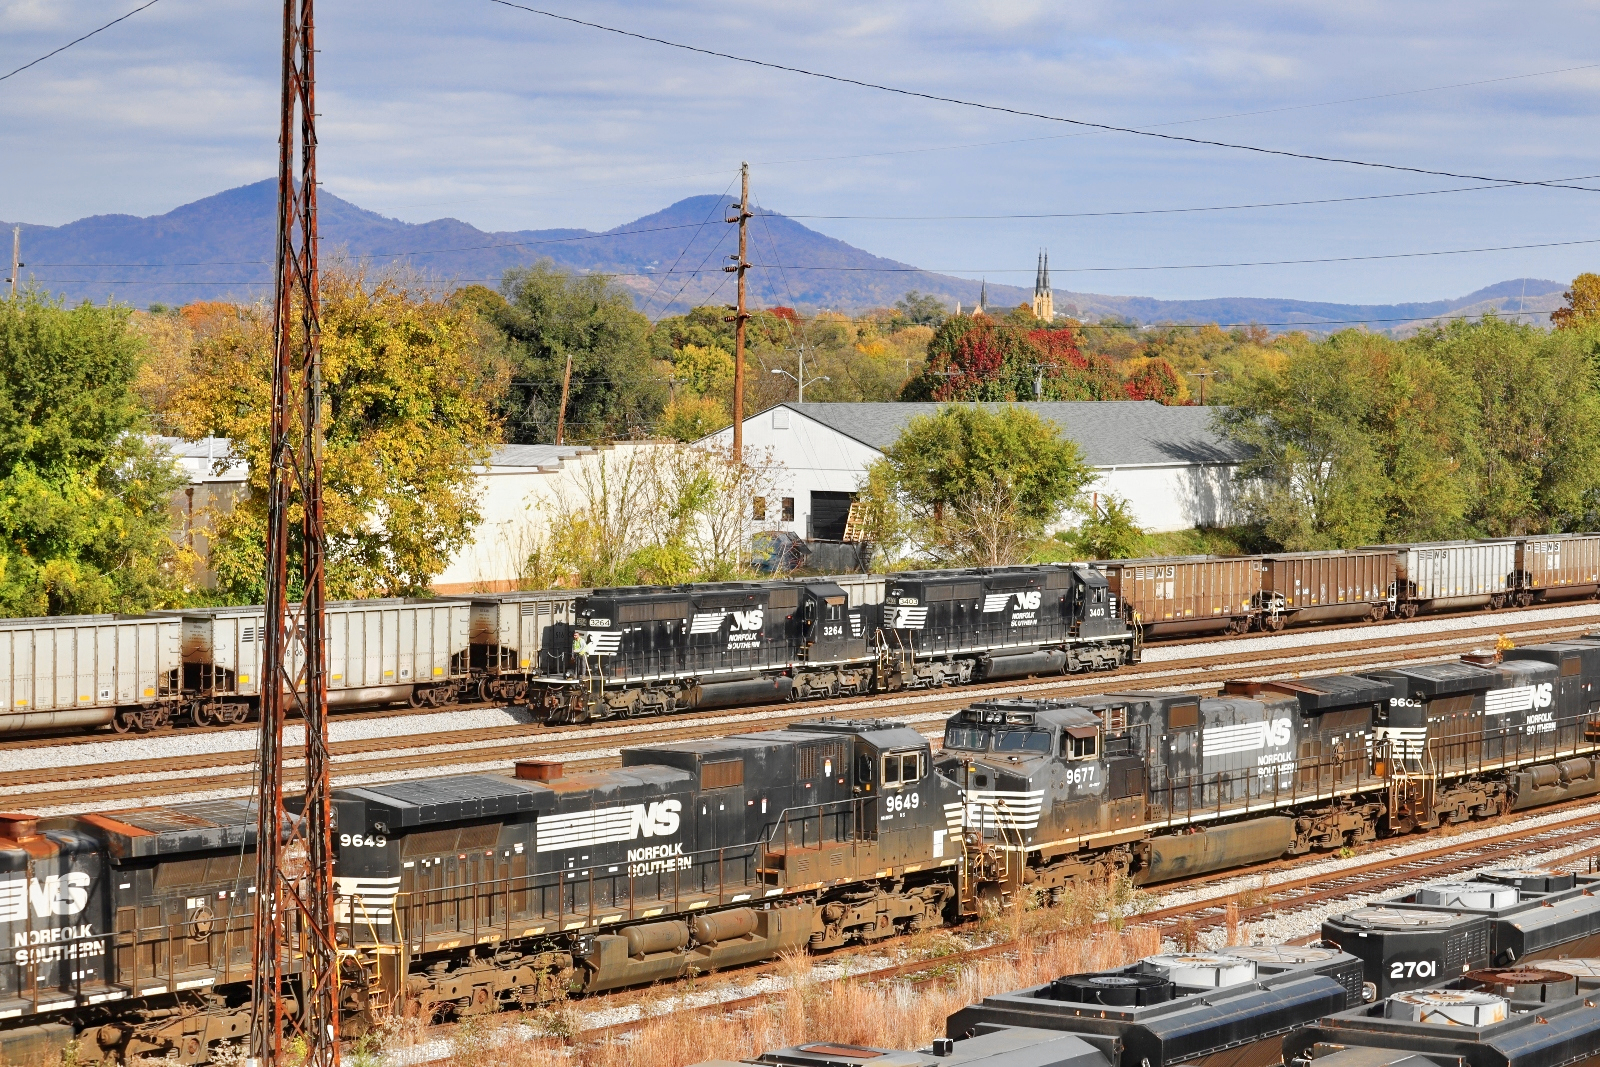 NS 3403 is a class EMD SD40-2 and  is pictured in Roanoke , Virginia, USA.  This was taken along the NS Roanoke District on the Norfolk Southern. Photo Copyright: Robby Lefkowitz uploaded to Railroad Gallery on 11/13/2022. This photograph of NS 3403 was taken on Saturday, October 29, 2022. All Rights Reserved. 